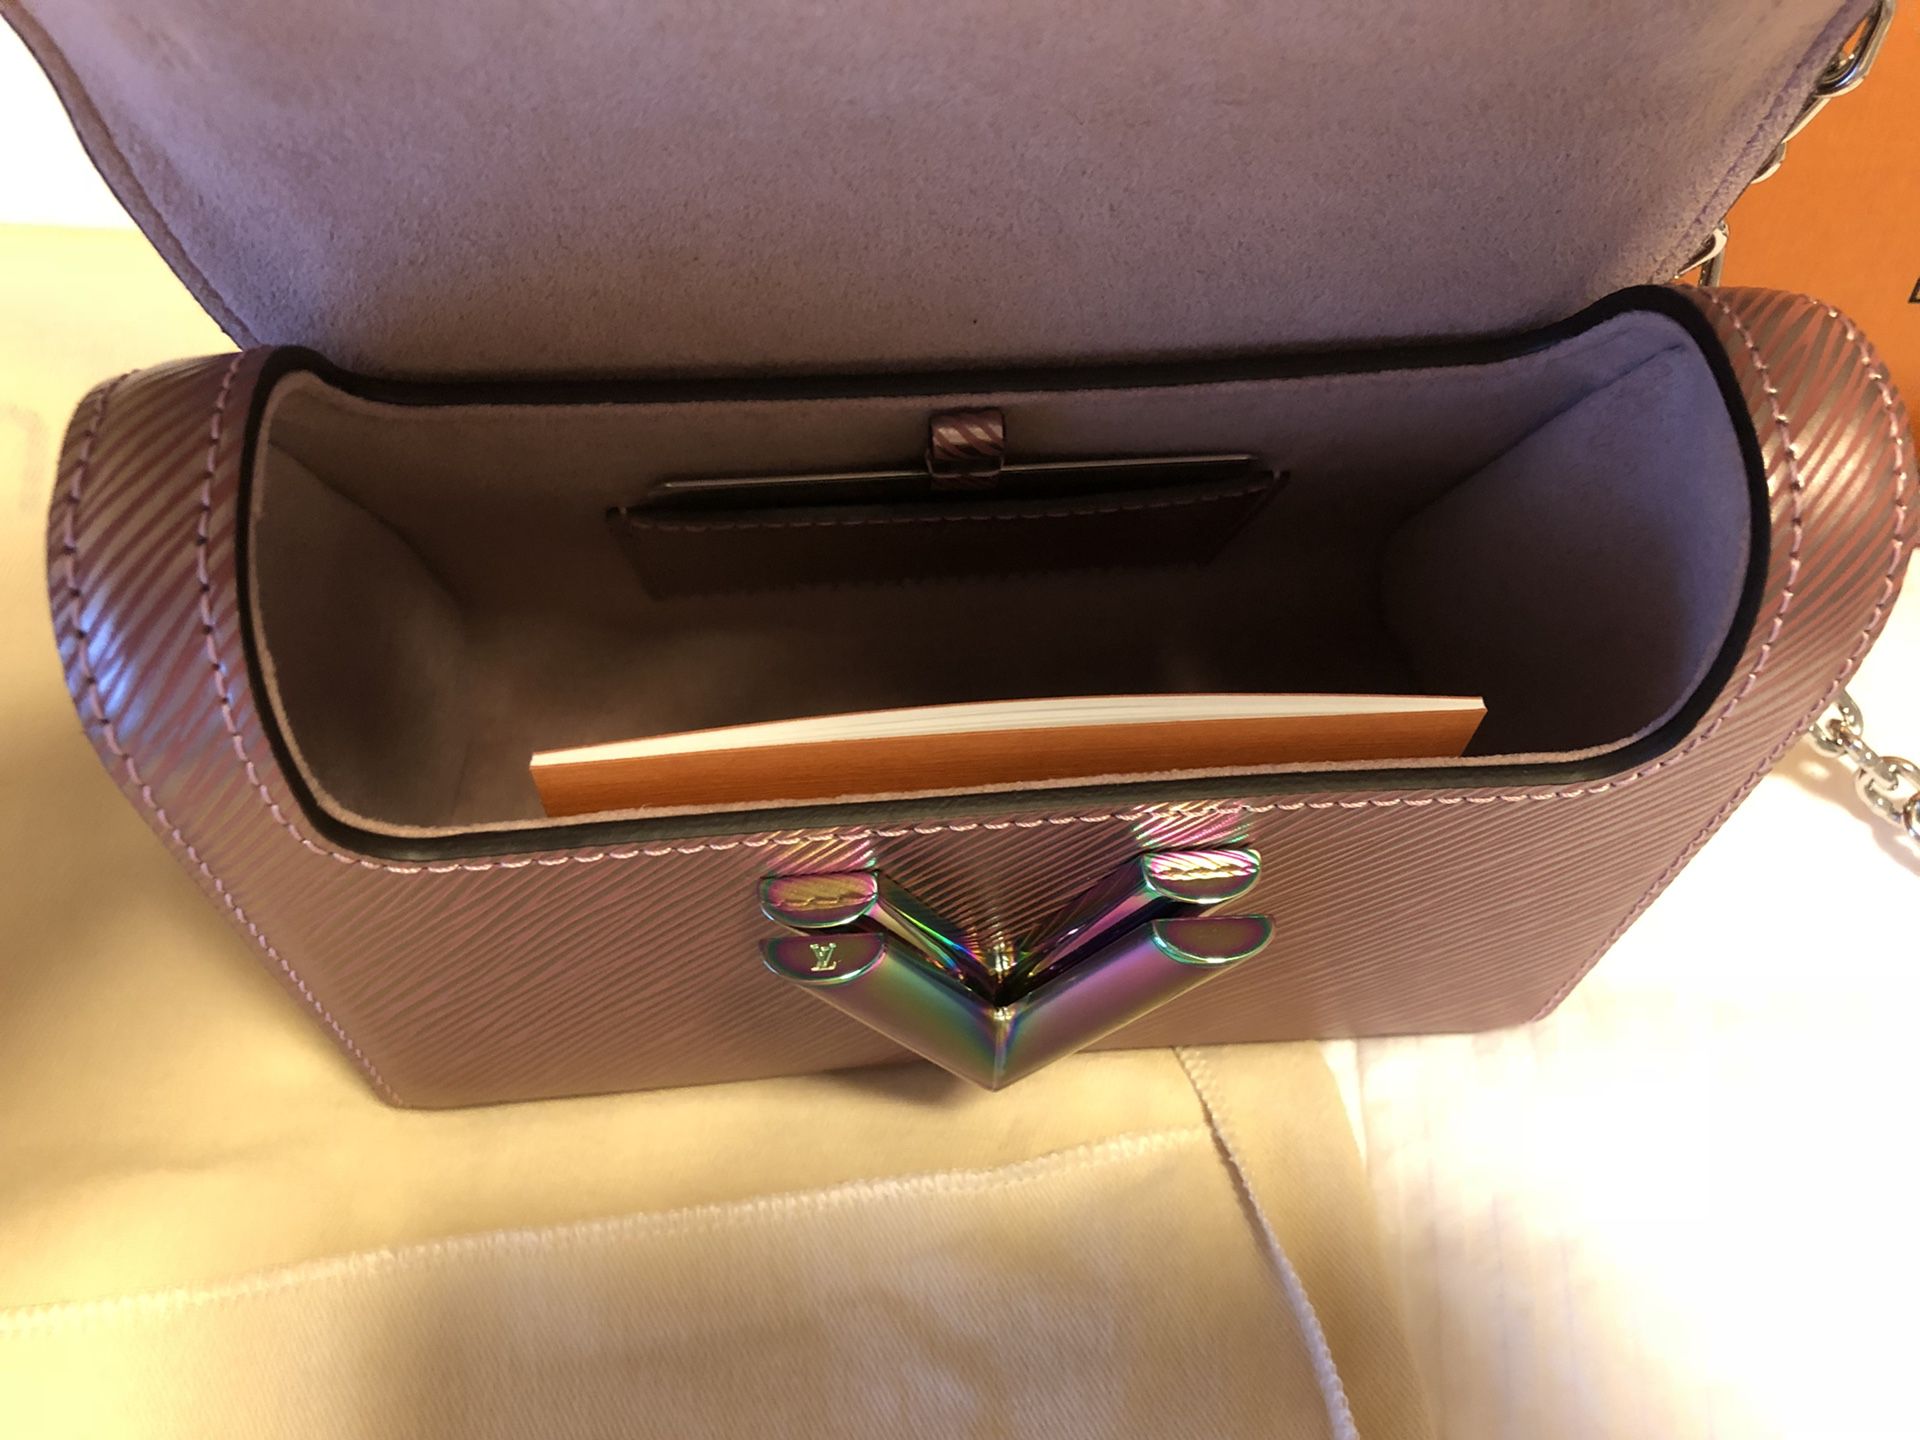 Authentic New Louis Vuitton twist Pm for Sale in Lafayette, CA - OfferUp